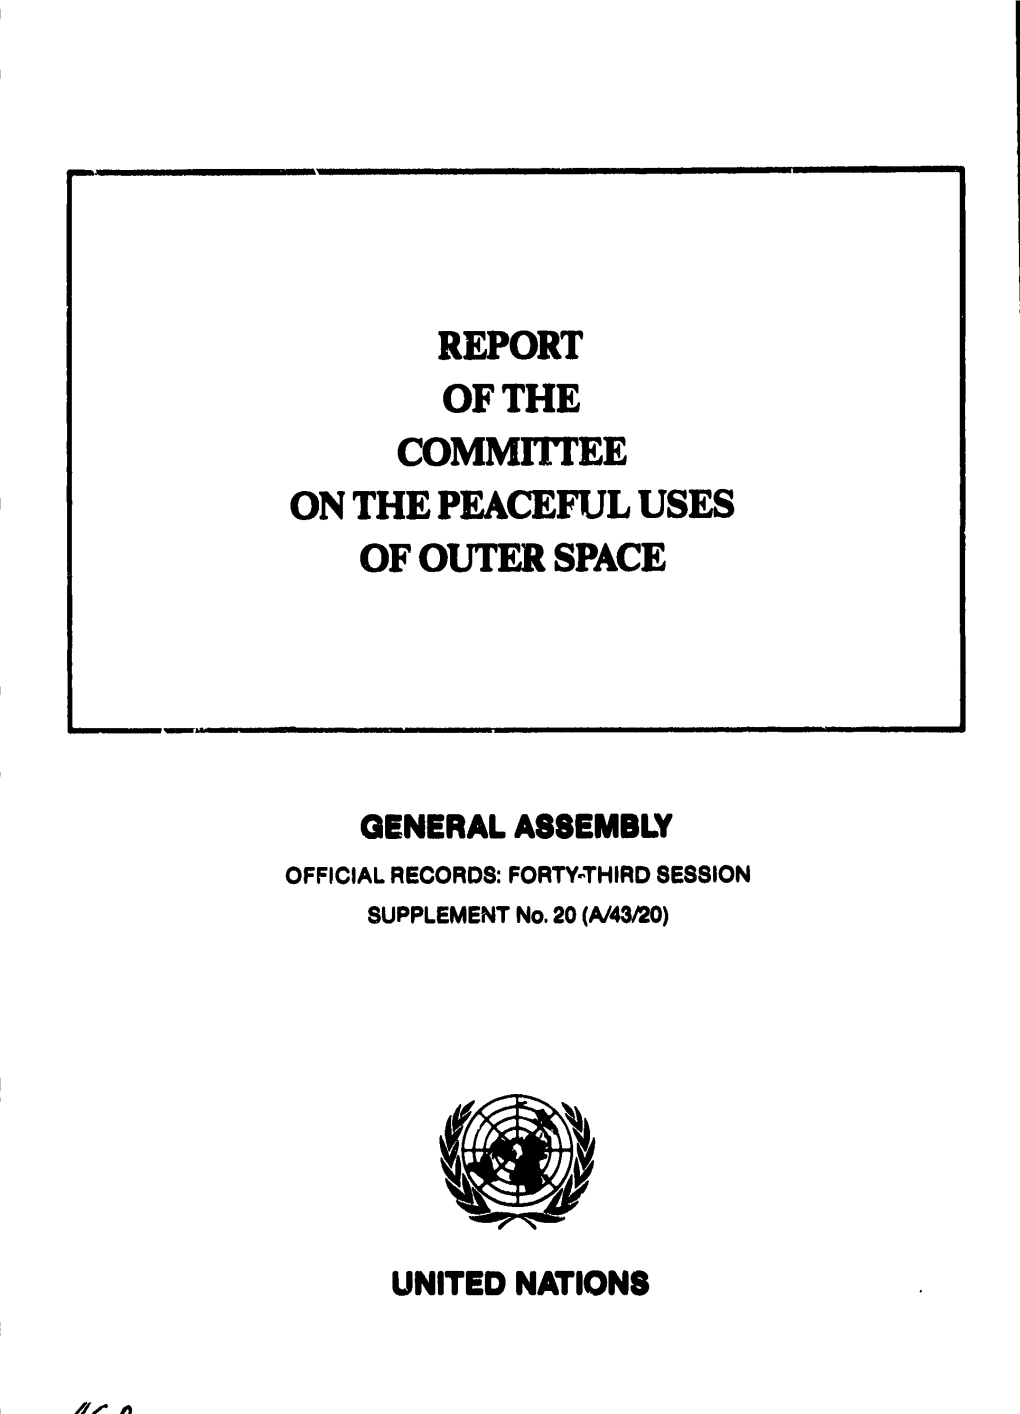 Report of the Commi1tee on the Peaceful Uses of Outer Space